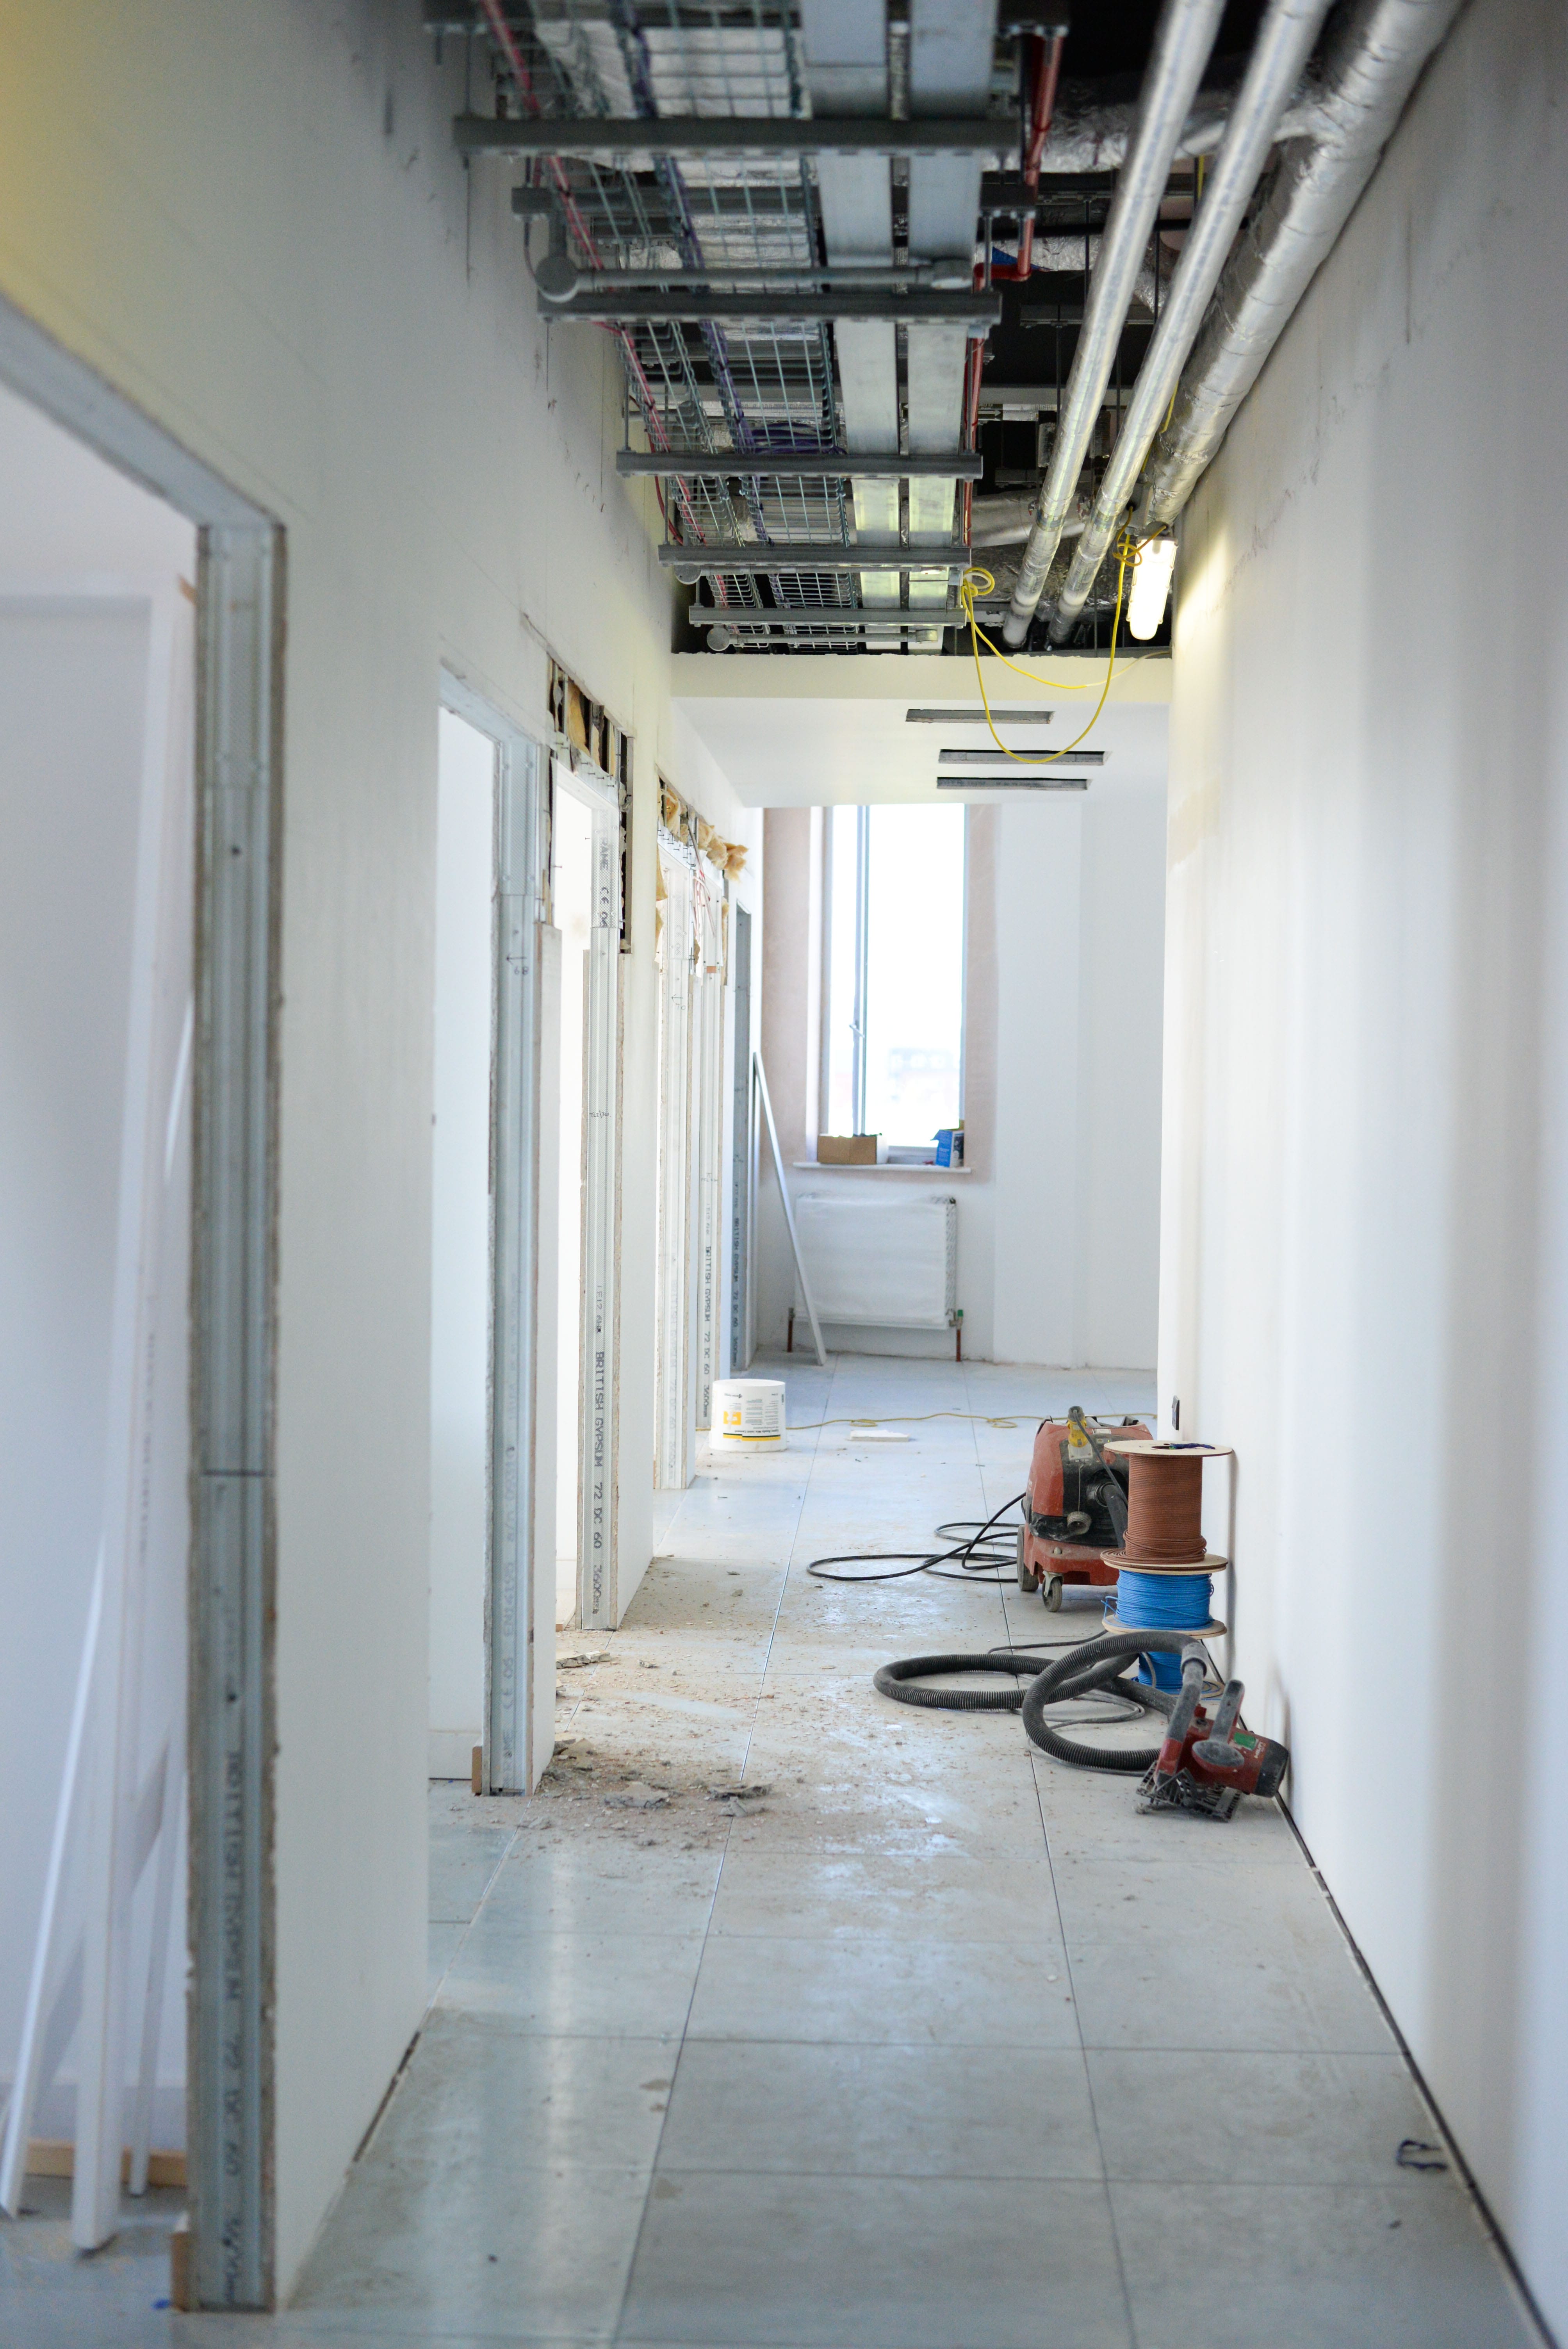 Image of a corridor in construction, the walls have been plastered